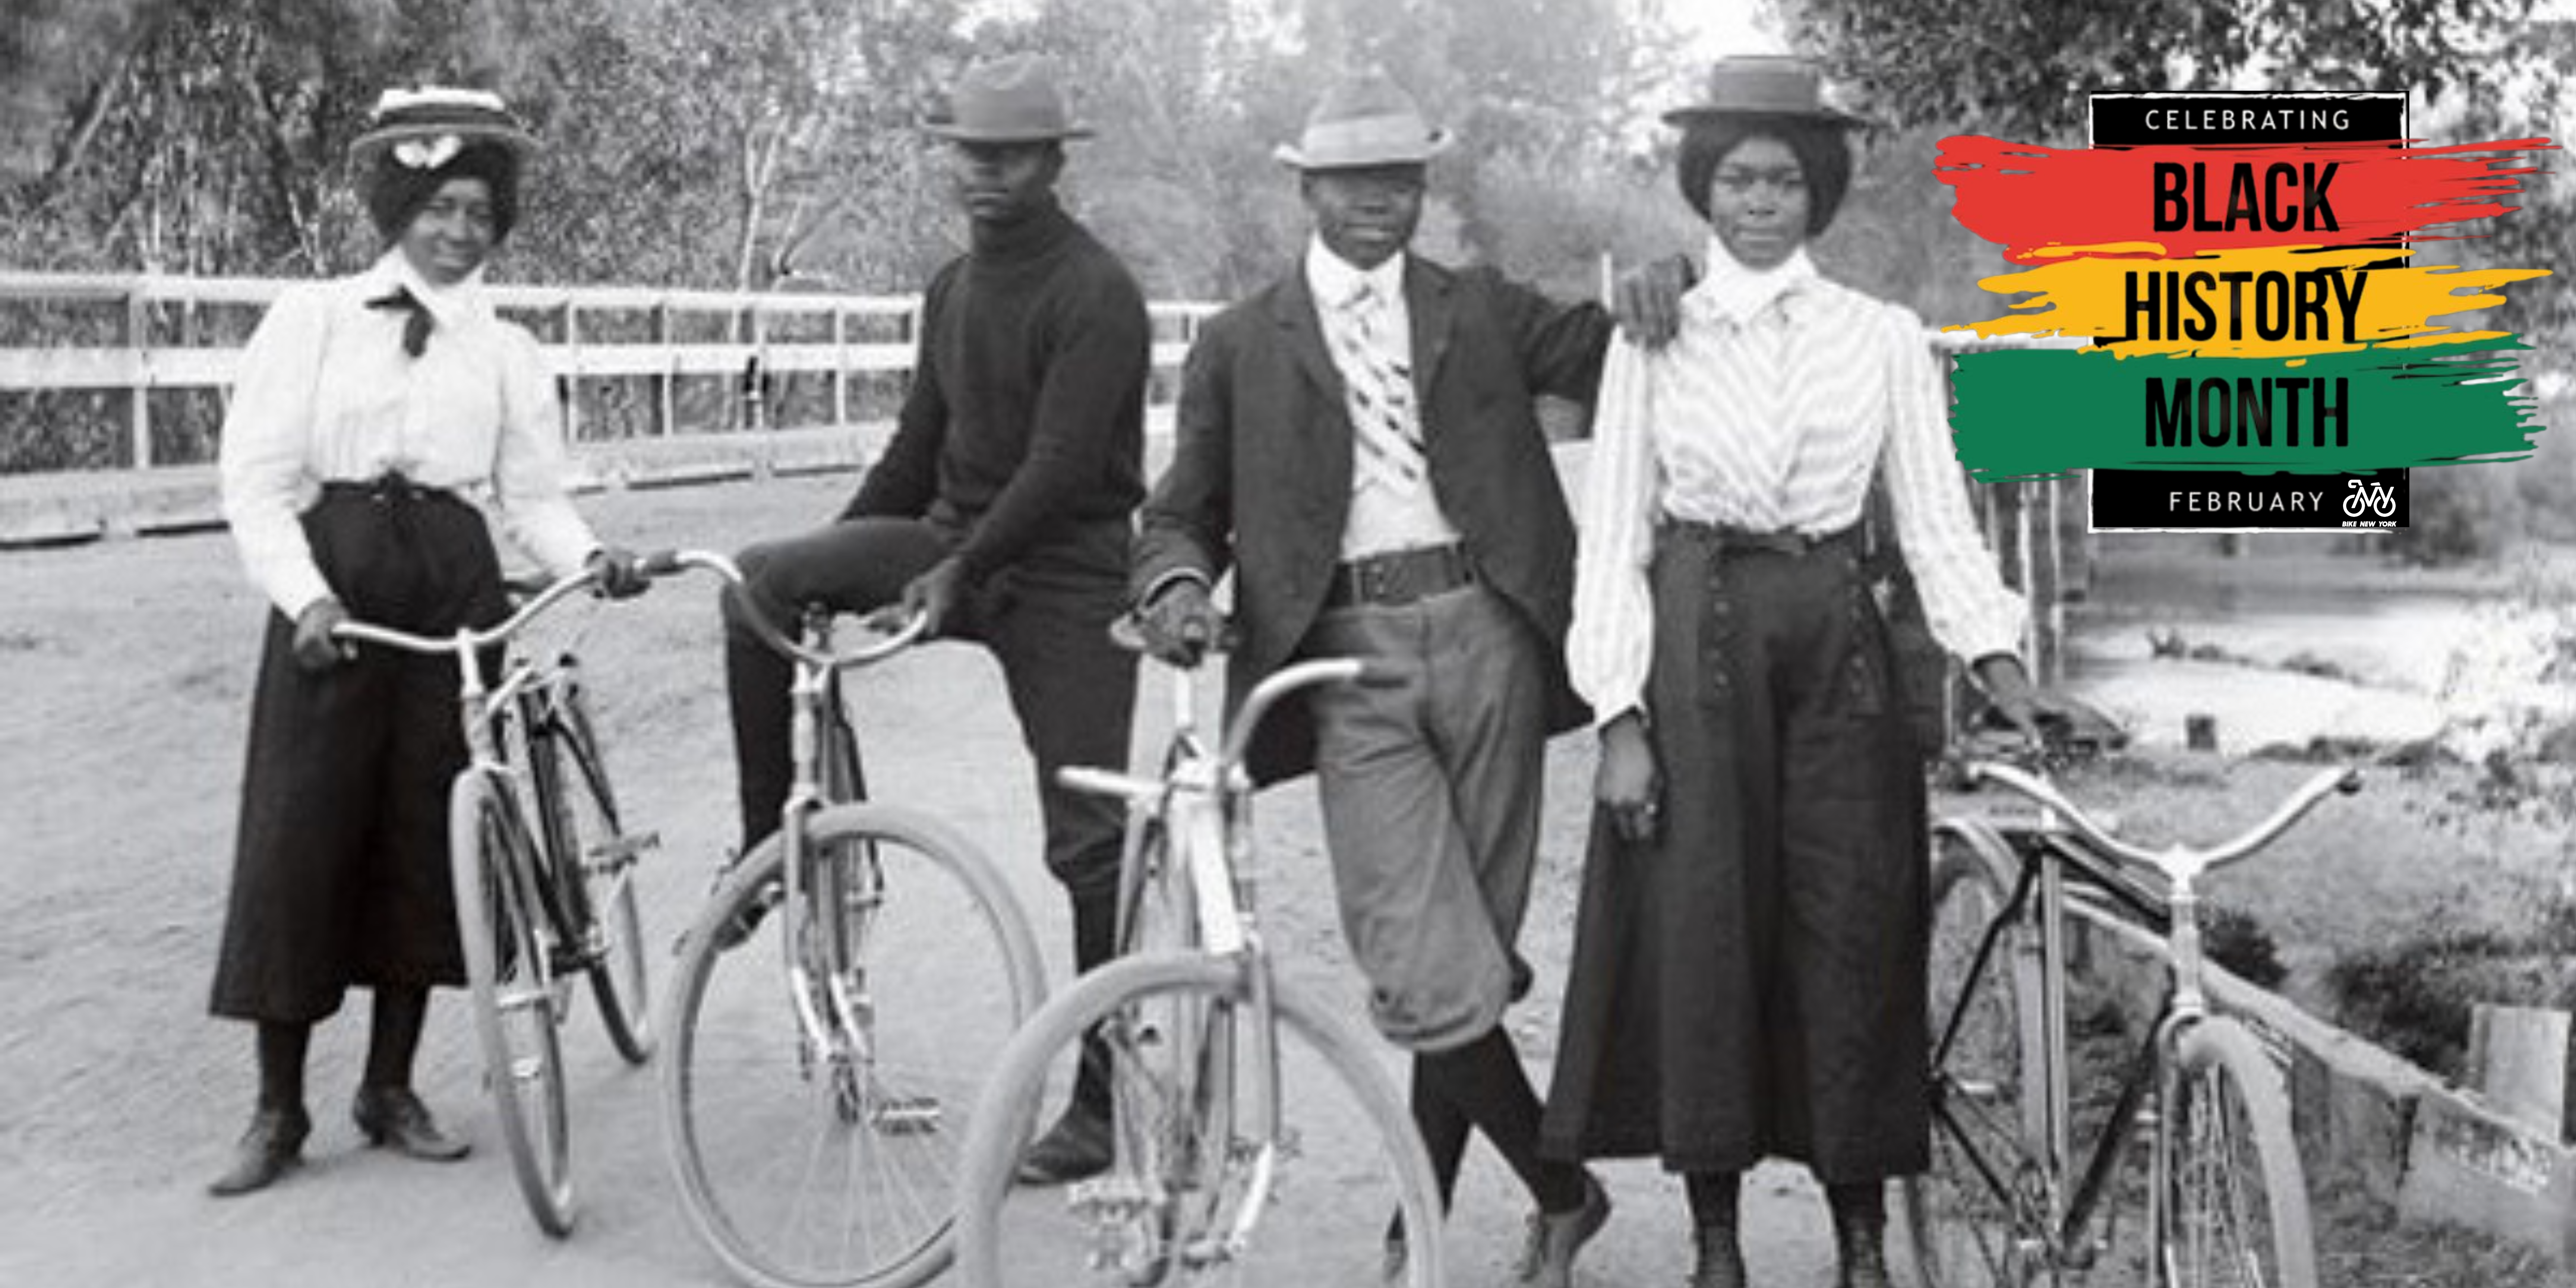 Banner featuring Black cyclists in the 1900s